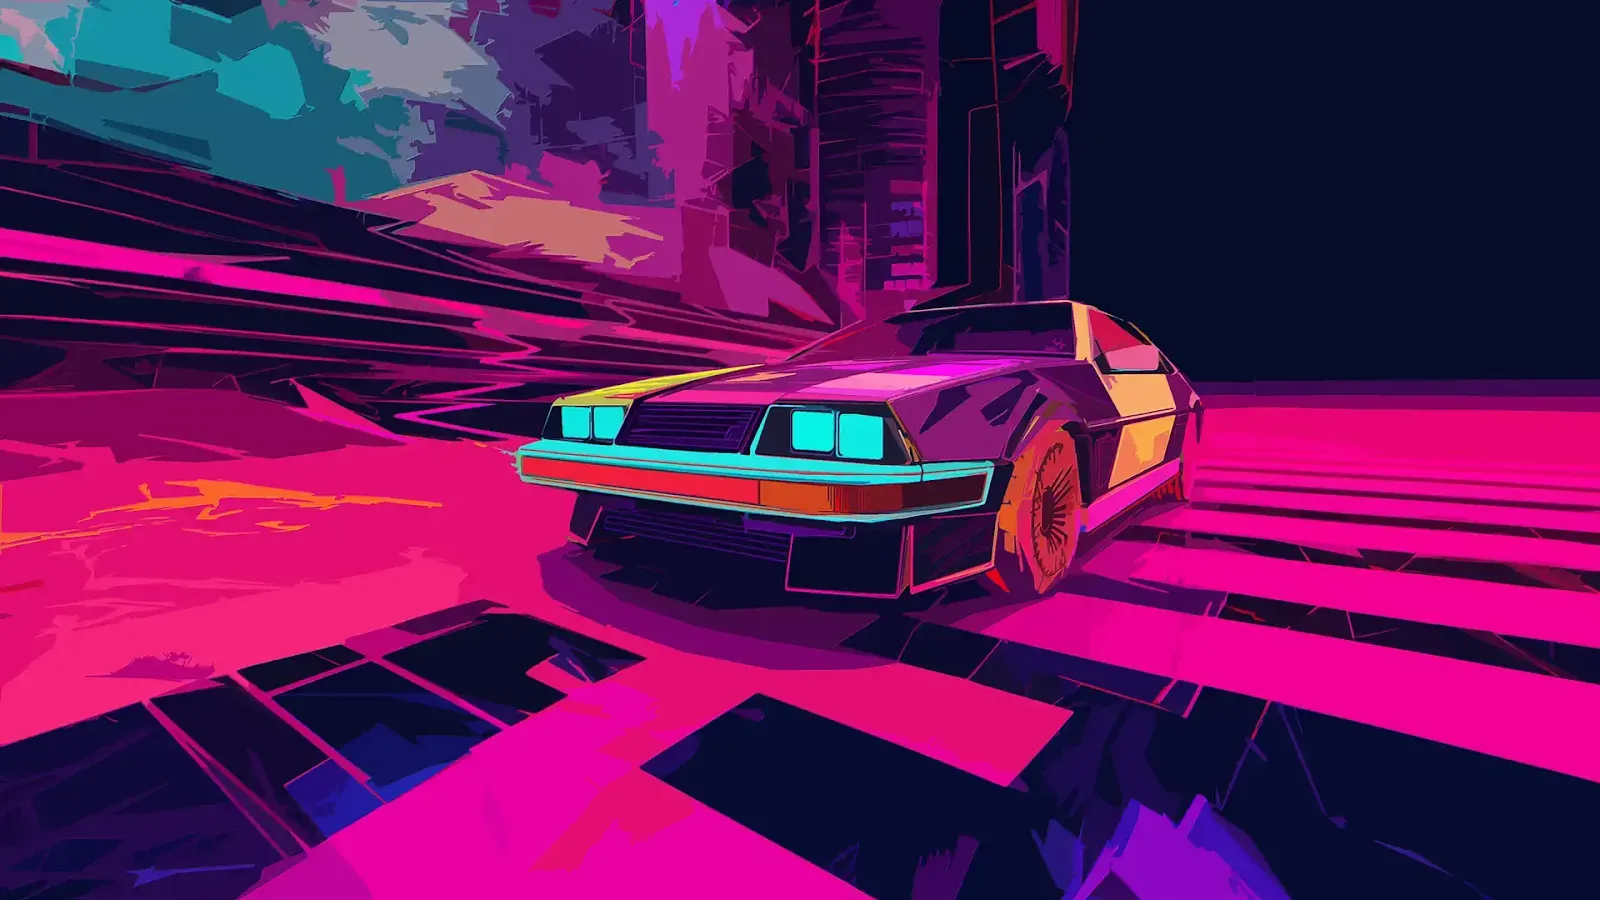 Vivid neon-colored retro sports car parked on a futuristic cyber grid with towering urban structures under a twilight sky.